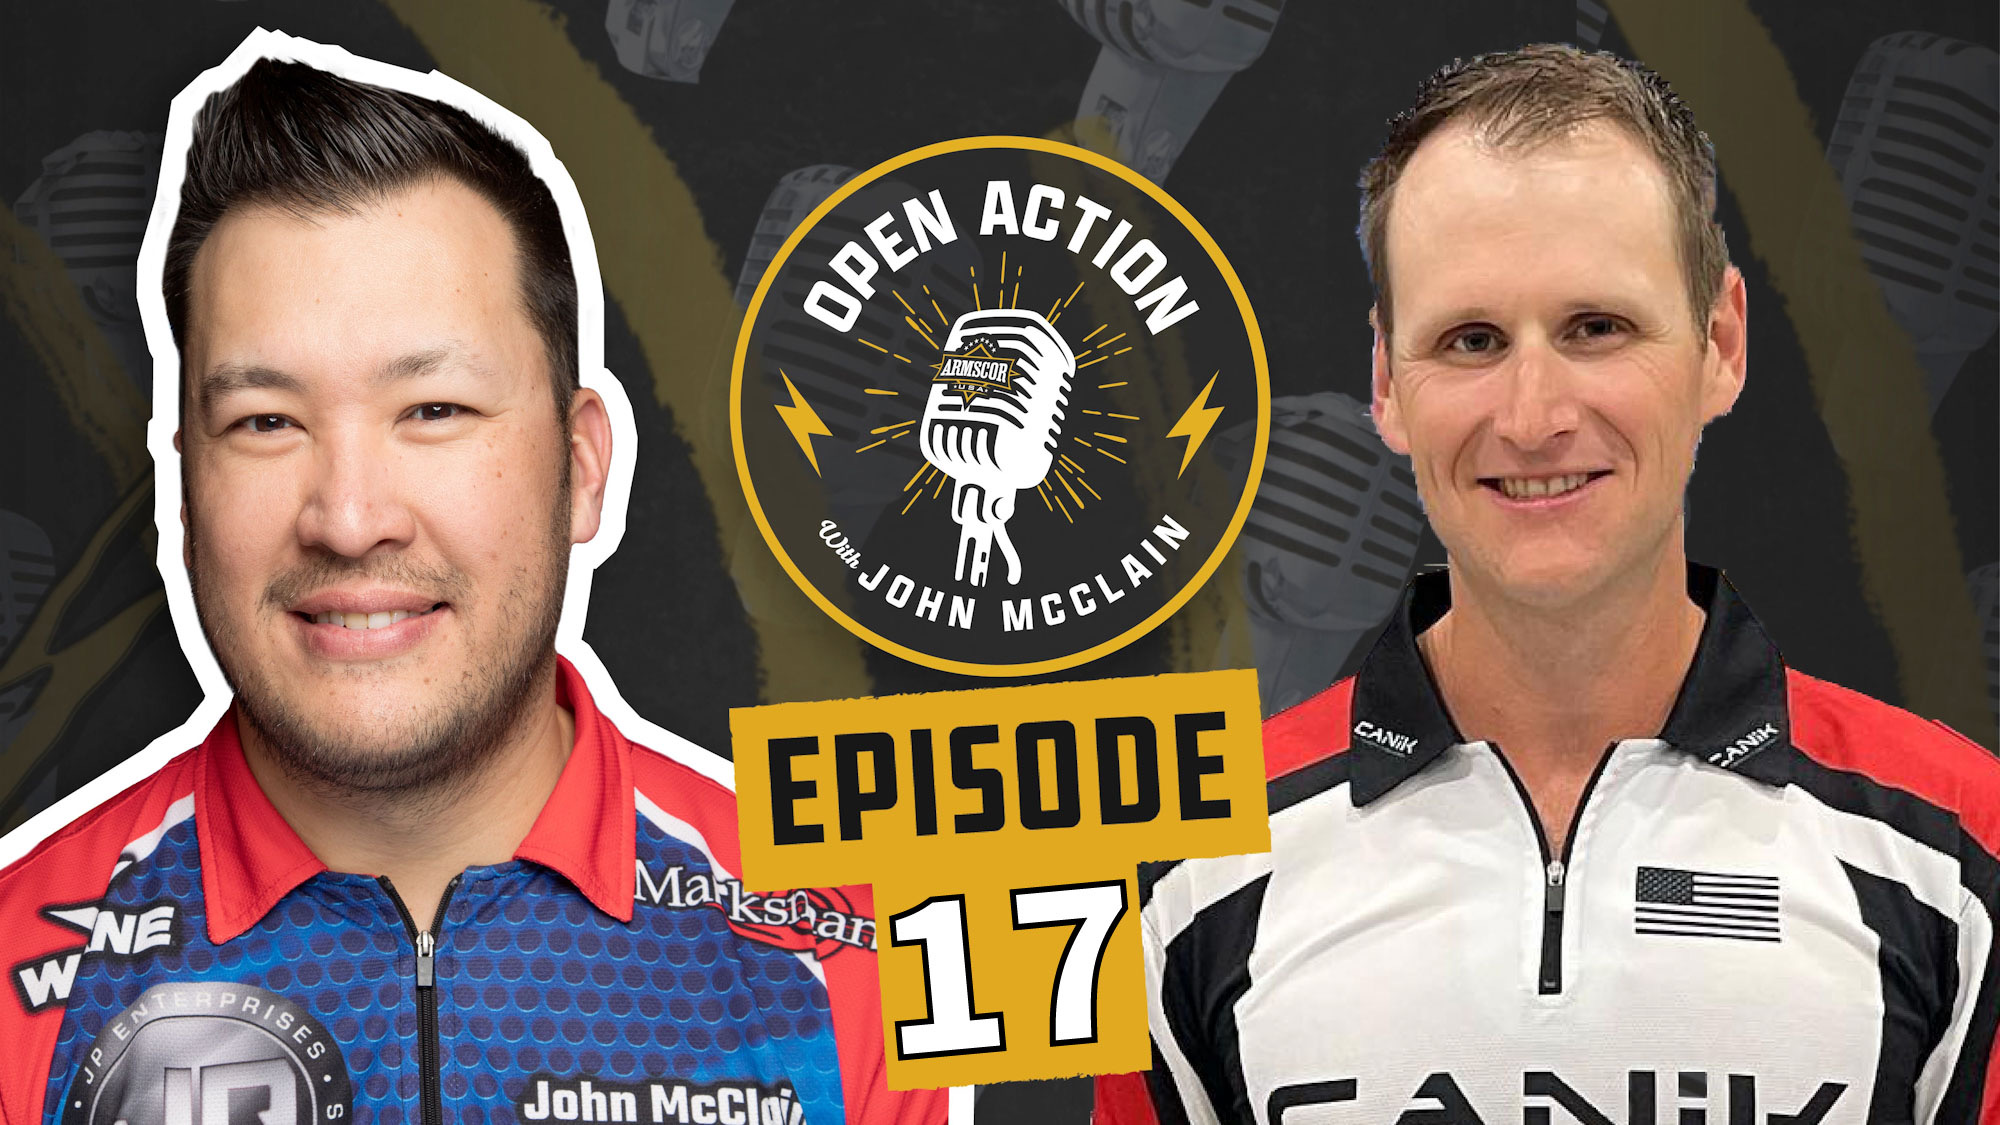 Armscor Open Action Podcast with John McClain & guest Nils Jonasson